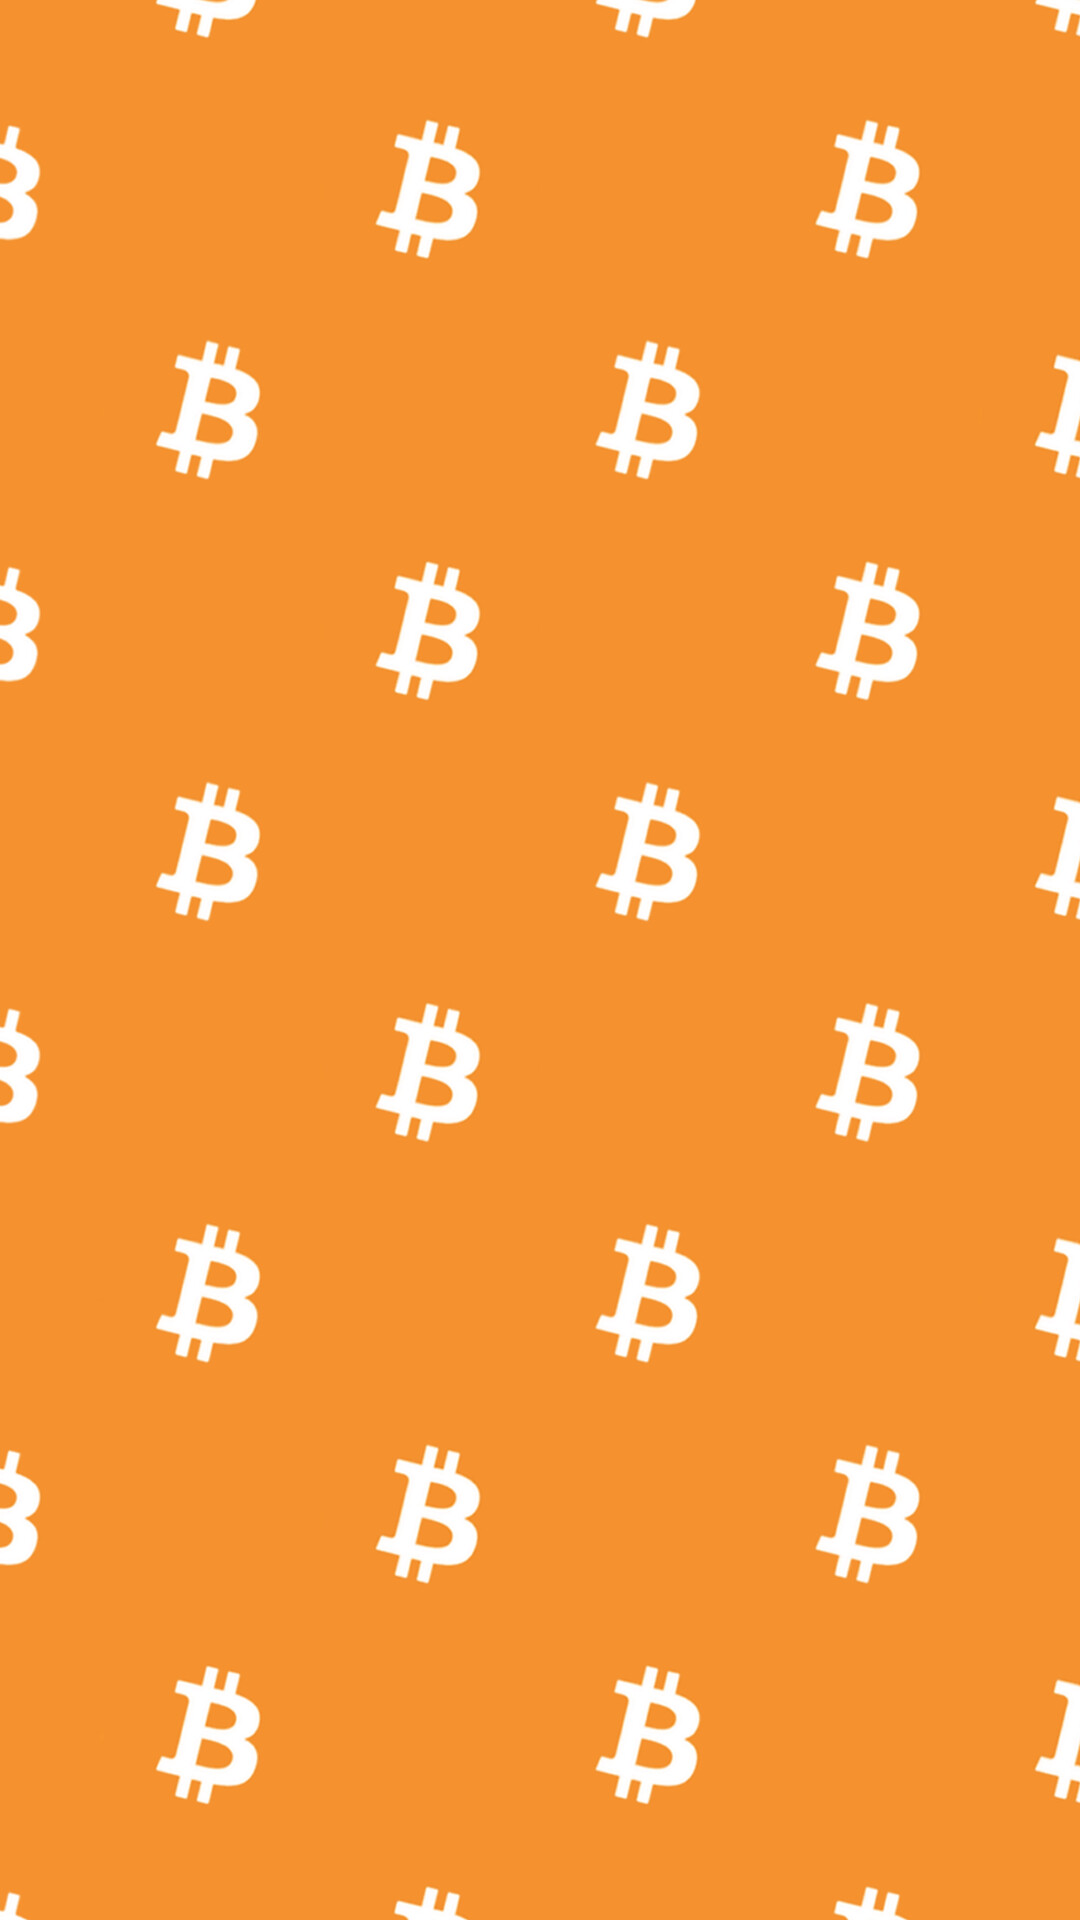 Cryptocurrency: BTC, One of the first cryptocurrencies to rise to popularity. 1080x1920 Full HD Background.